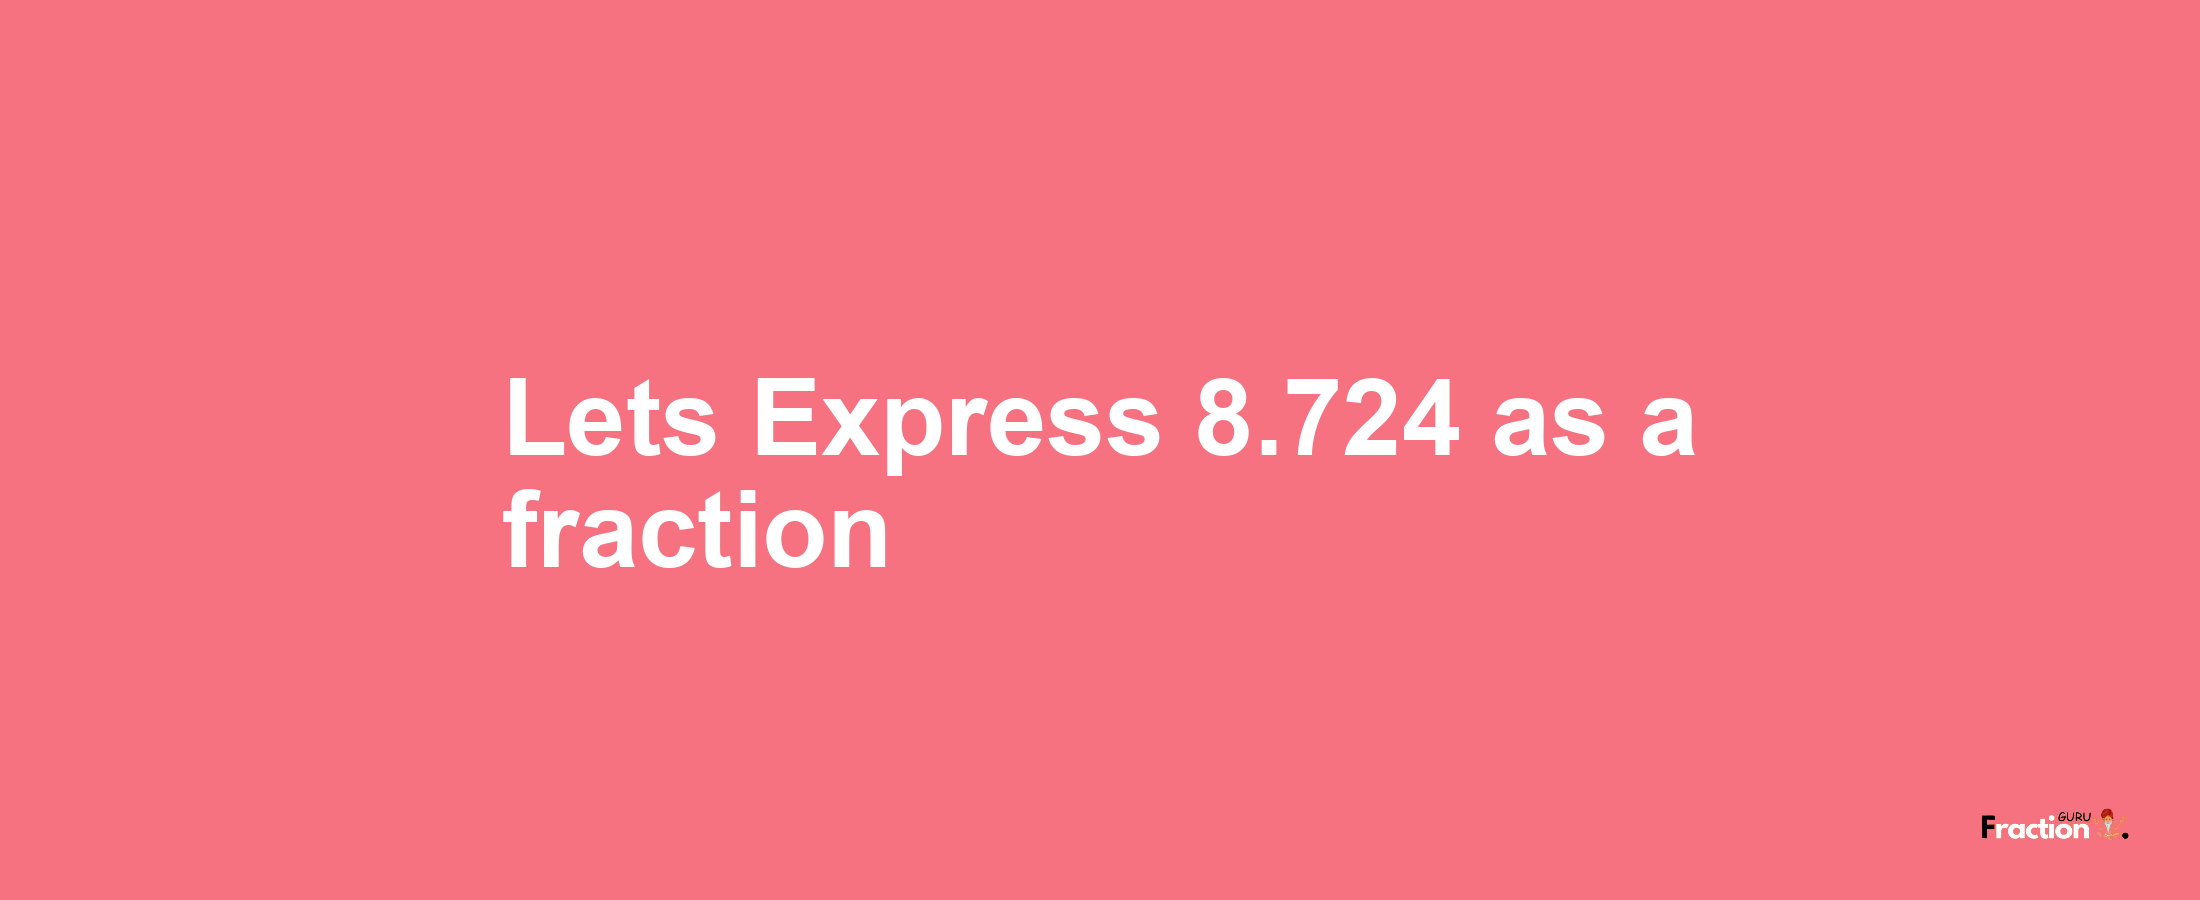 Lets Express 8.724 as afraction